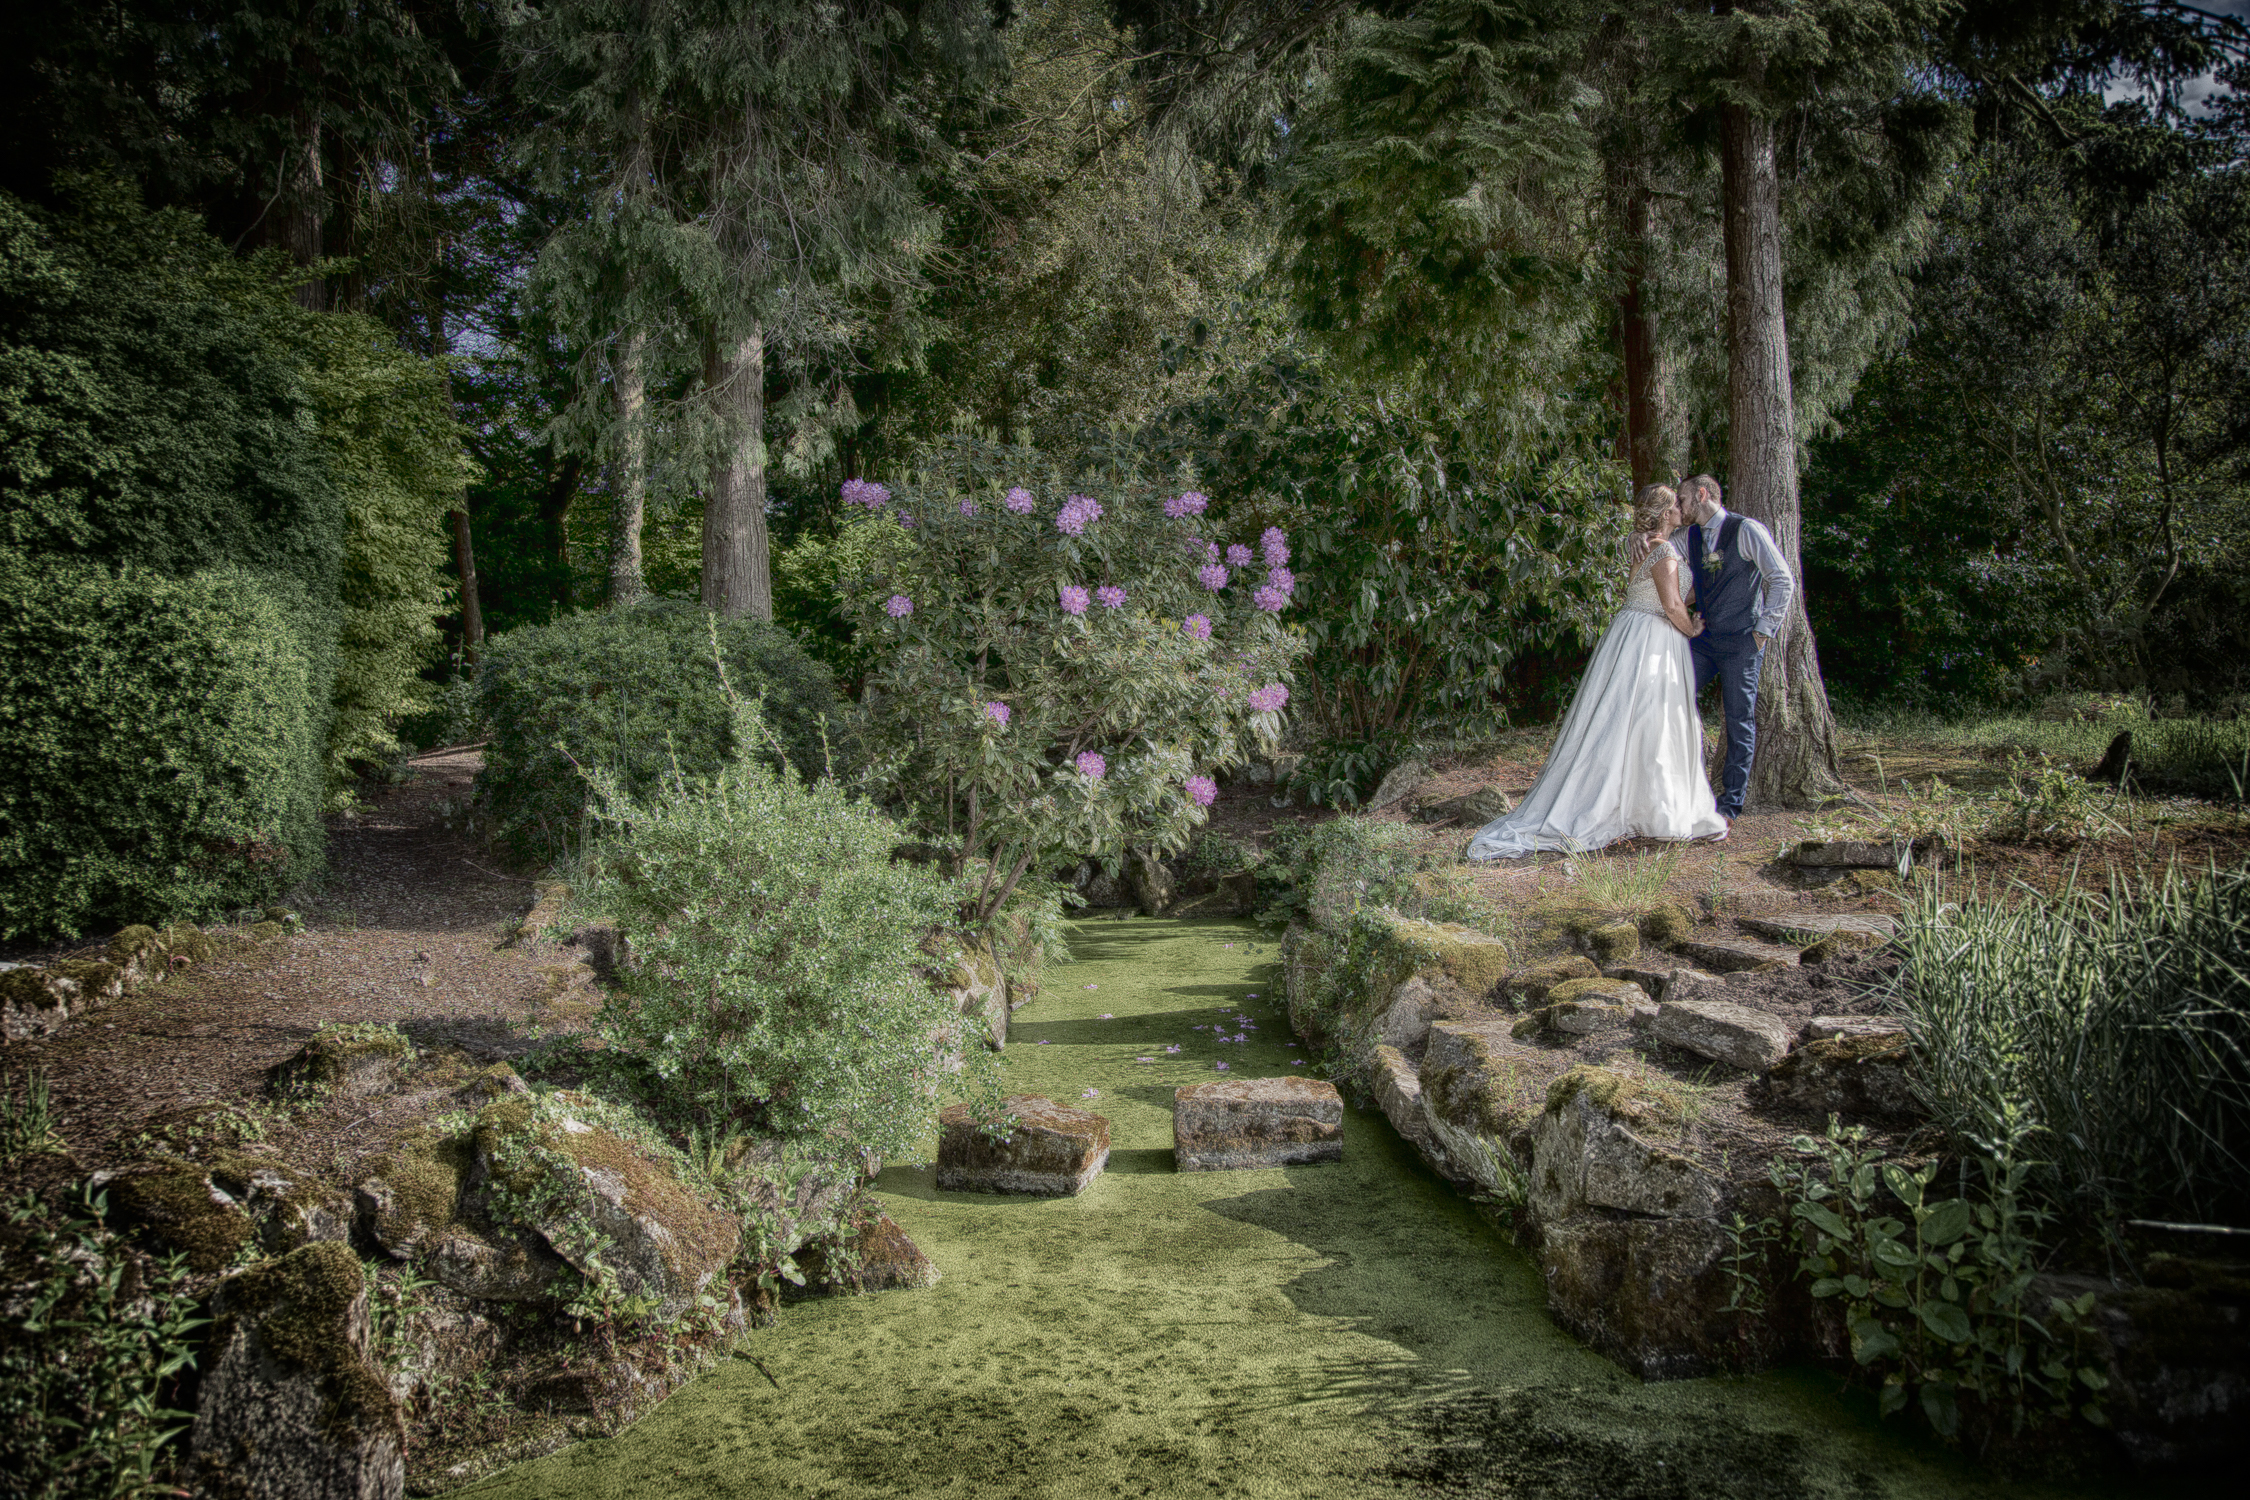 A bride and groom standing next to a pond in a garden.